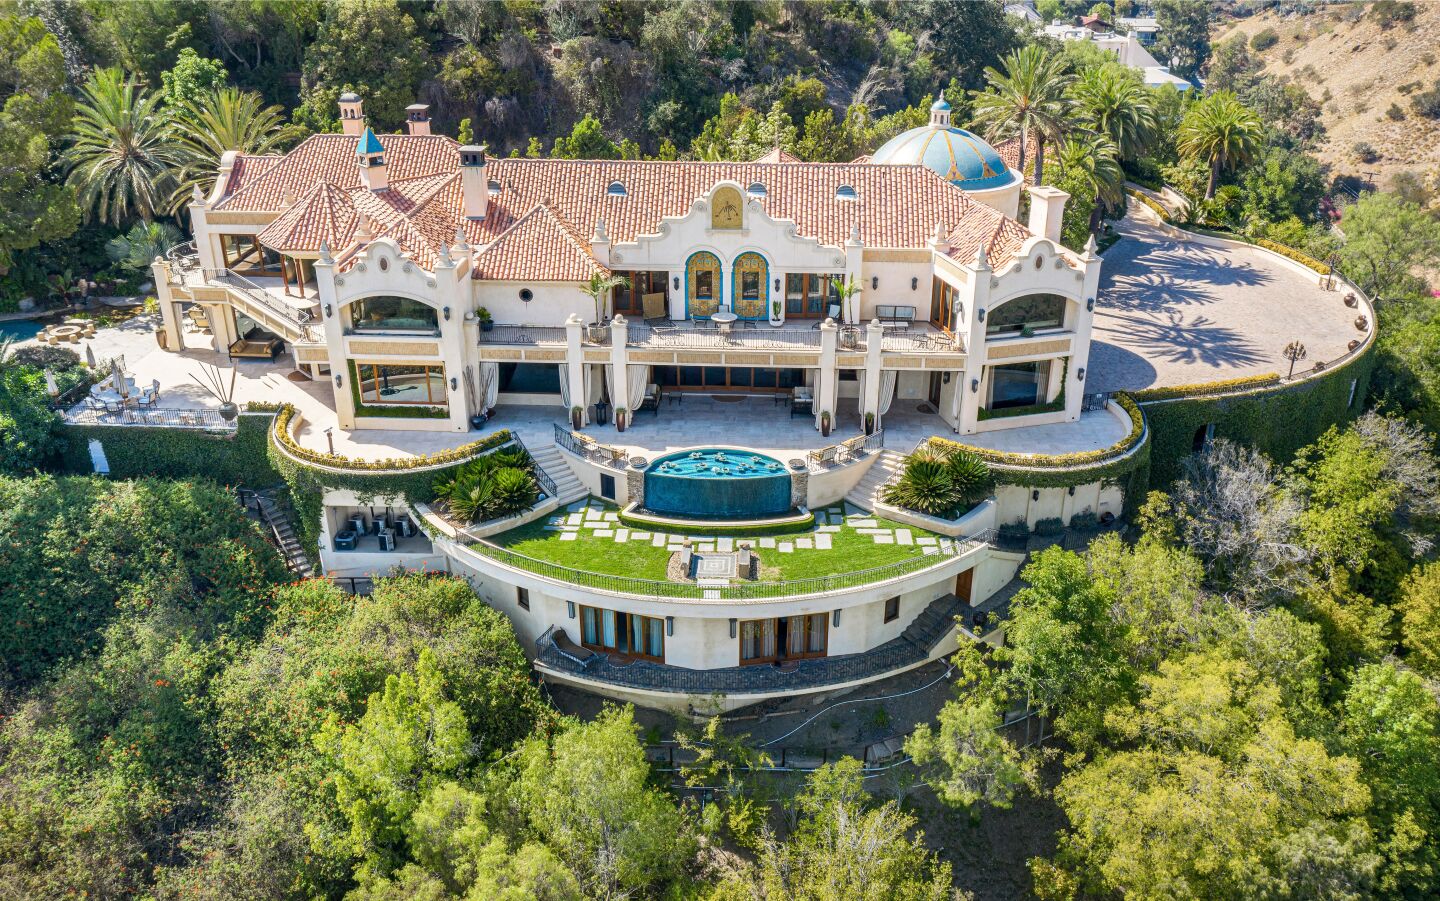 The 21,000-square-foot mansion.